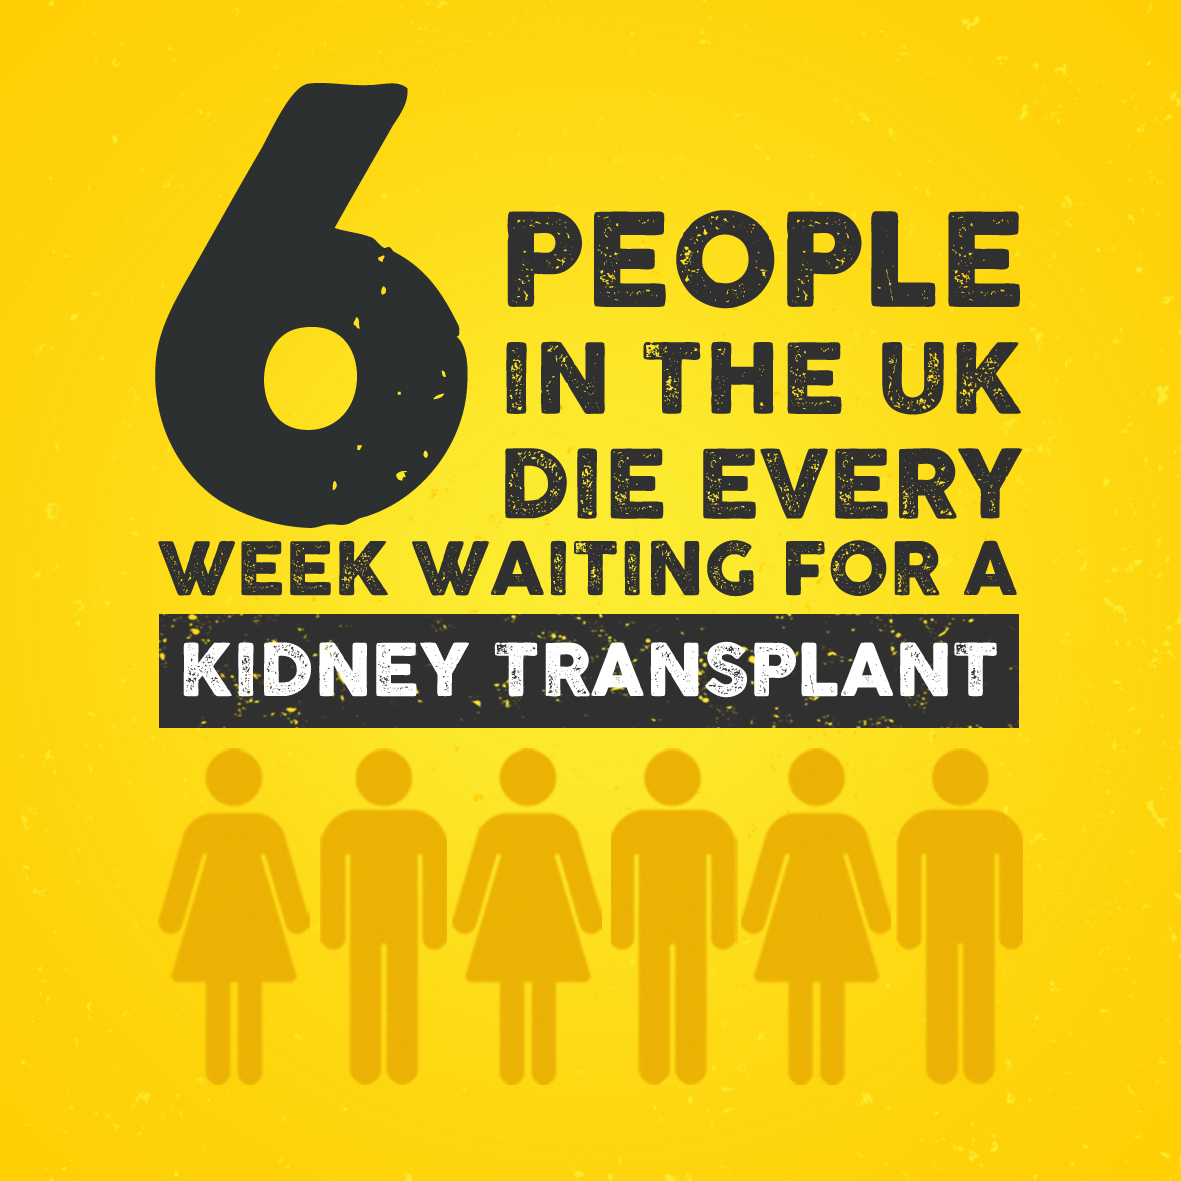 📢 A devastating reality. We want you to join us in spreading awareness of how serious #KidneyDisease is & helping others spot the signs & symptoms early. Early detection could be the difference between life & death for someone. #KidneysMatter #KidneyHealth #WorldKidneyDay